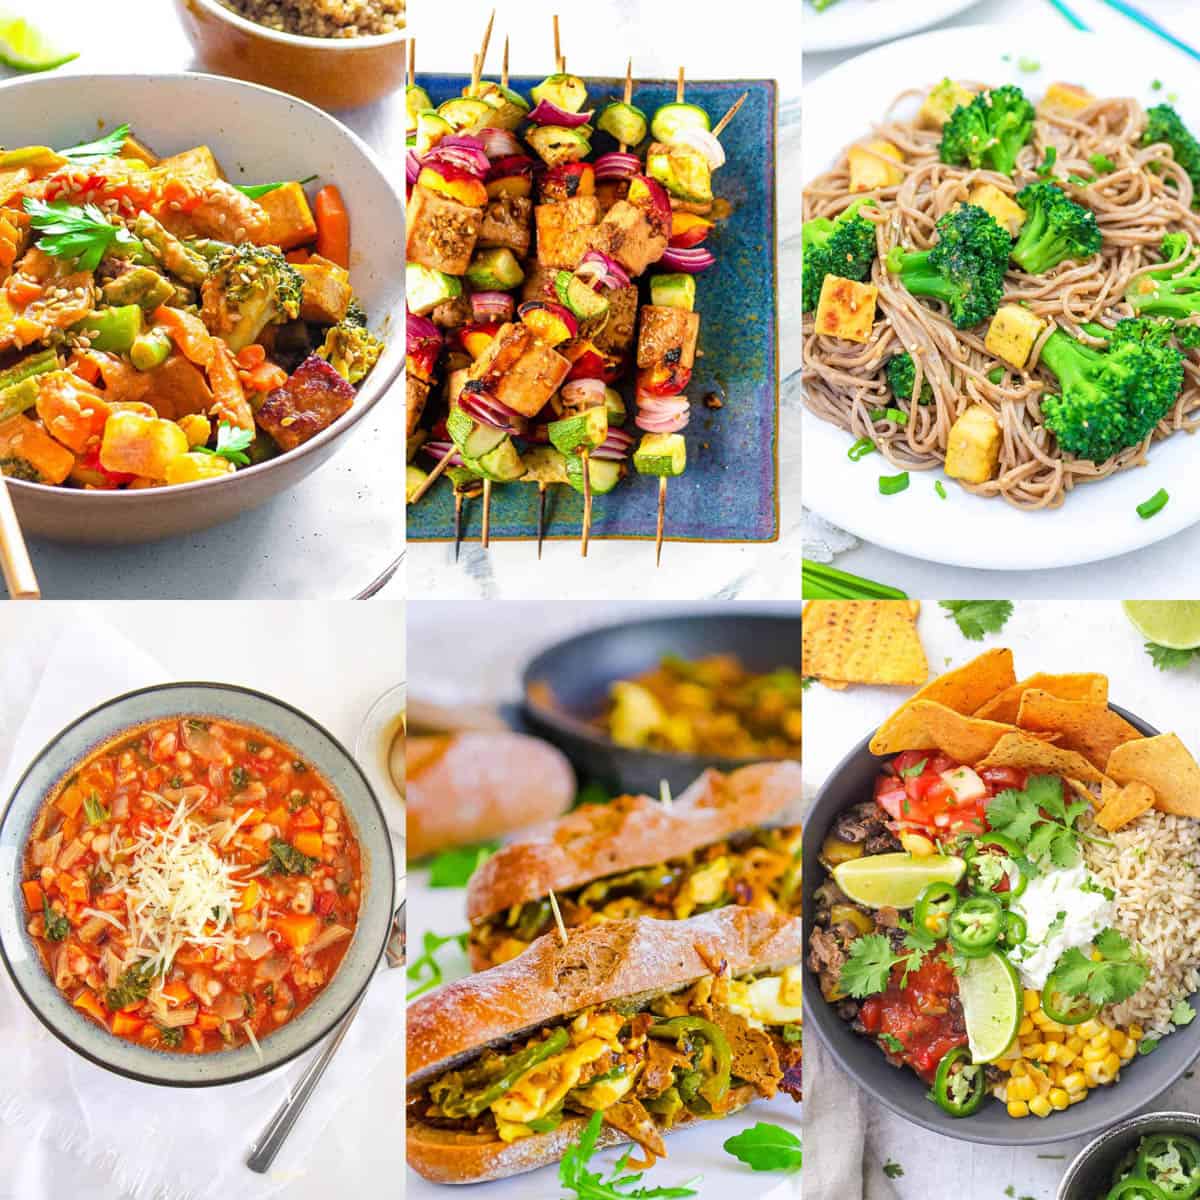 Collage of high protein vegan meal prep ideas on a white background.